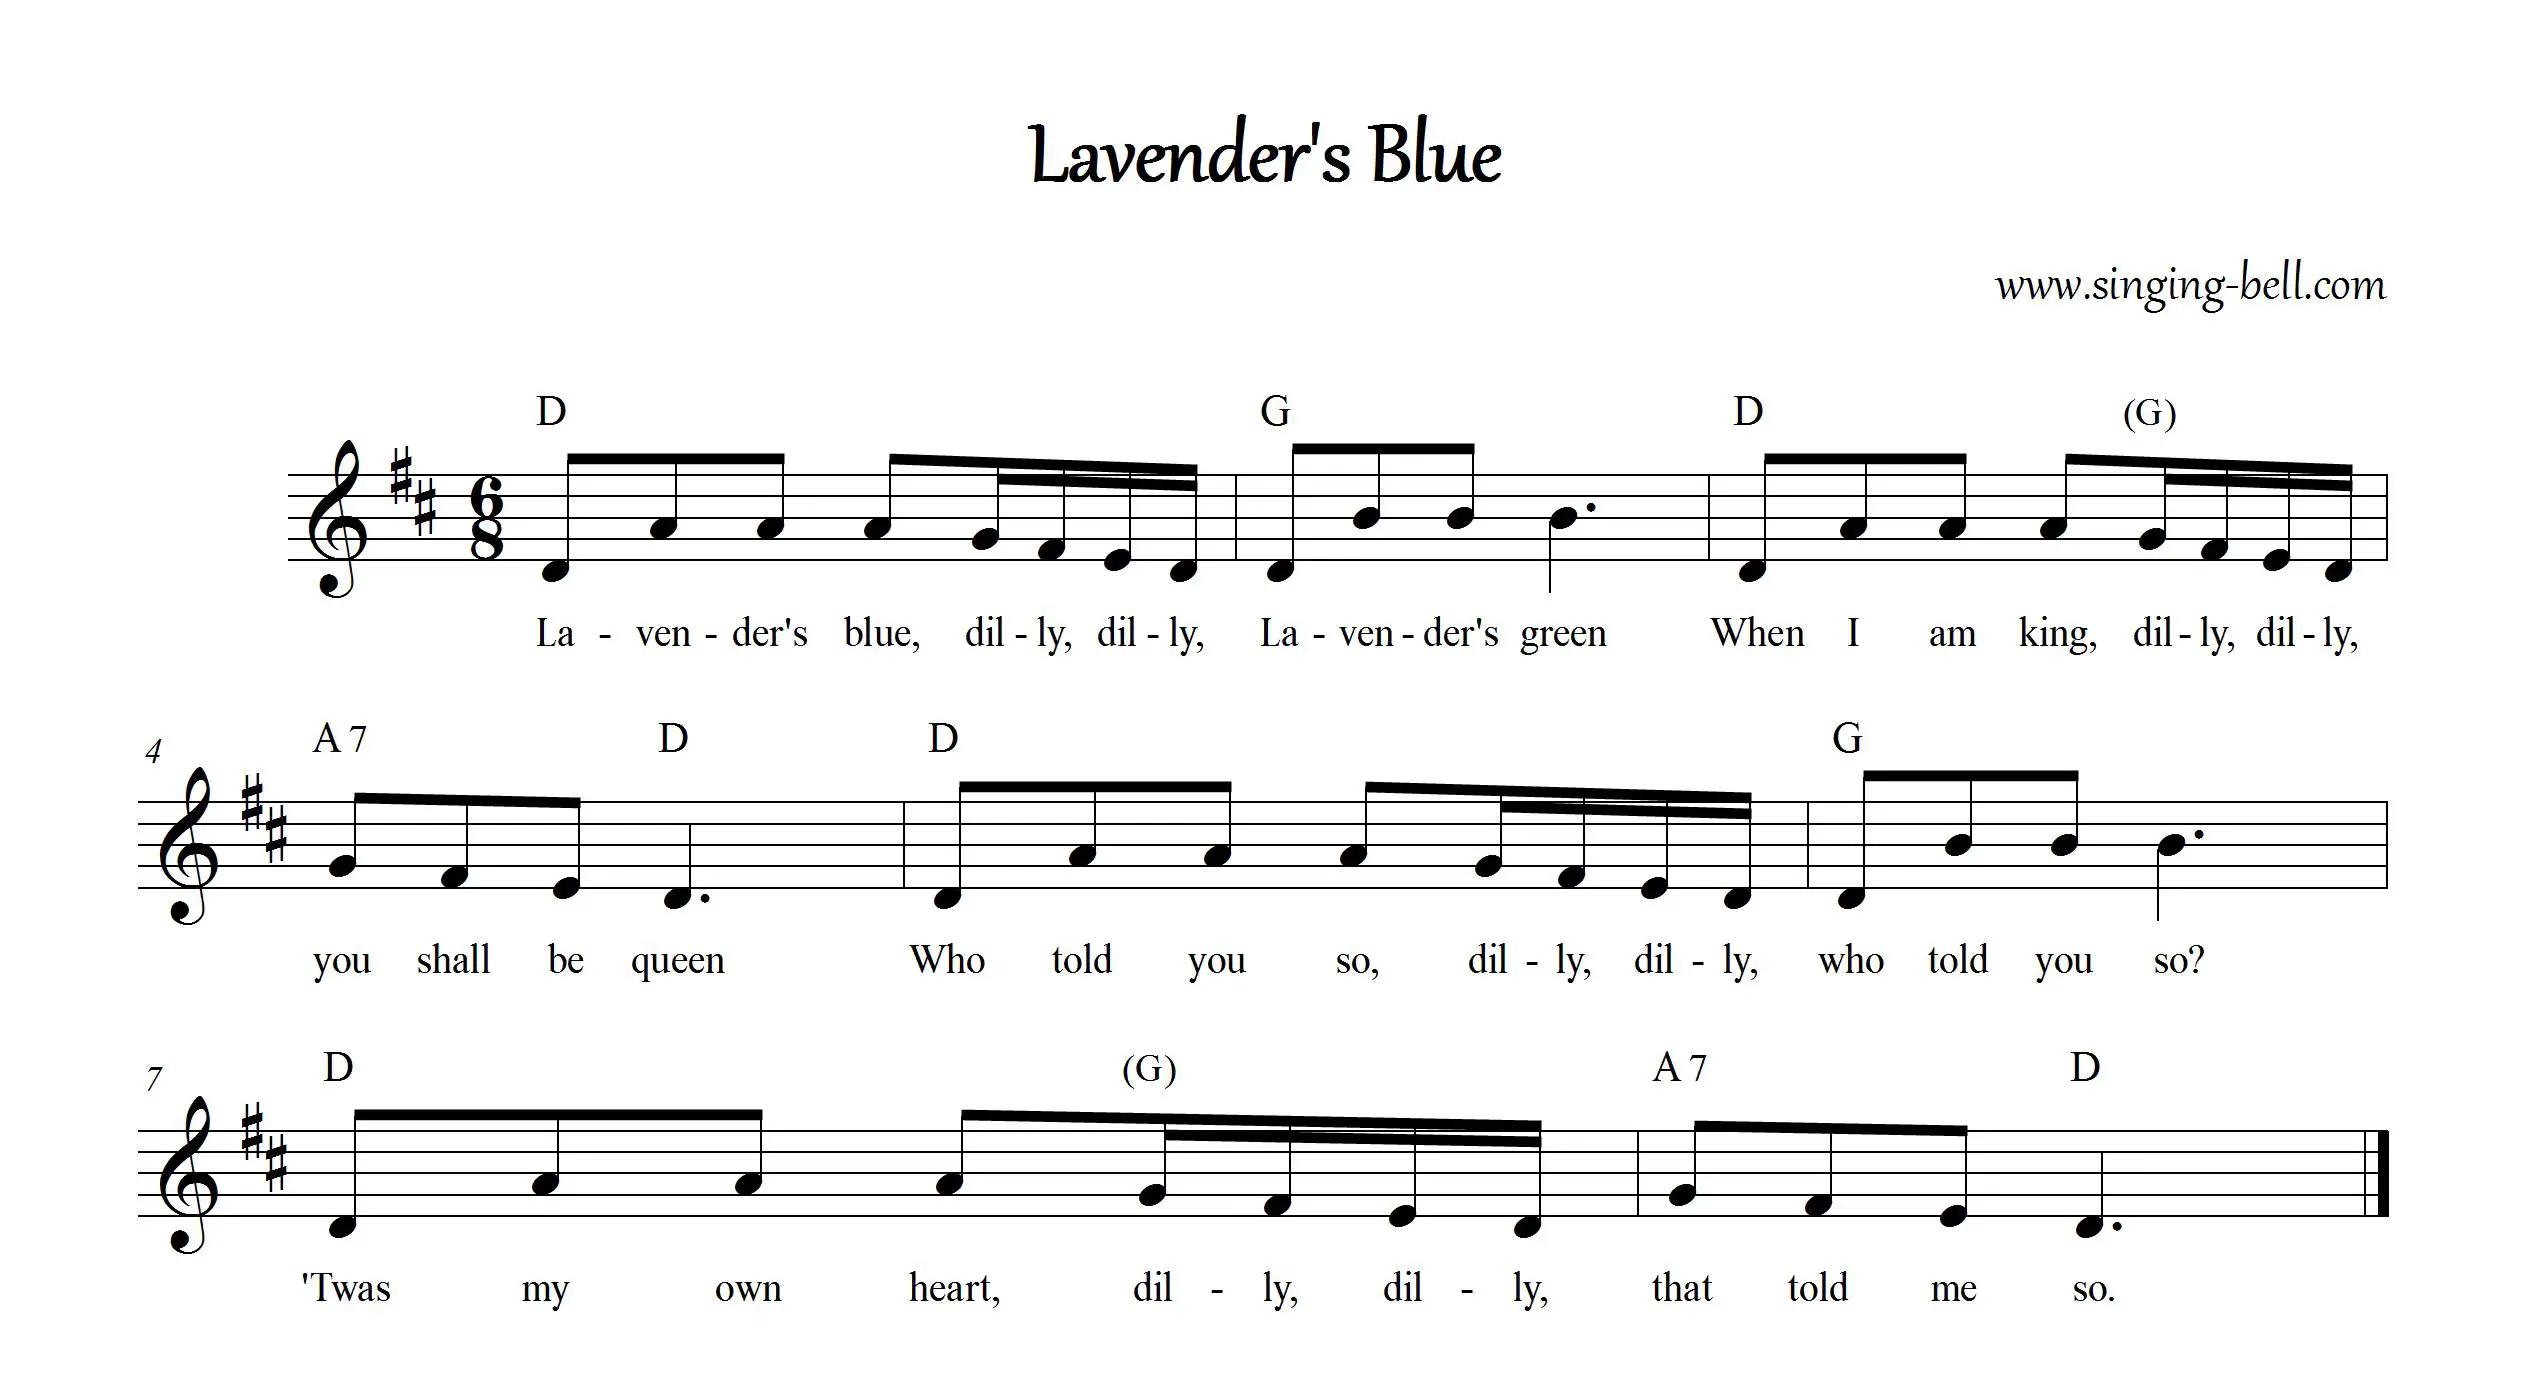 Lavender's Blue Sheet Music with chords